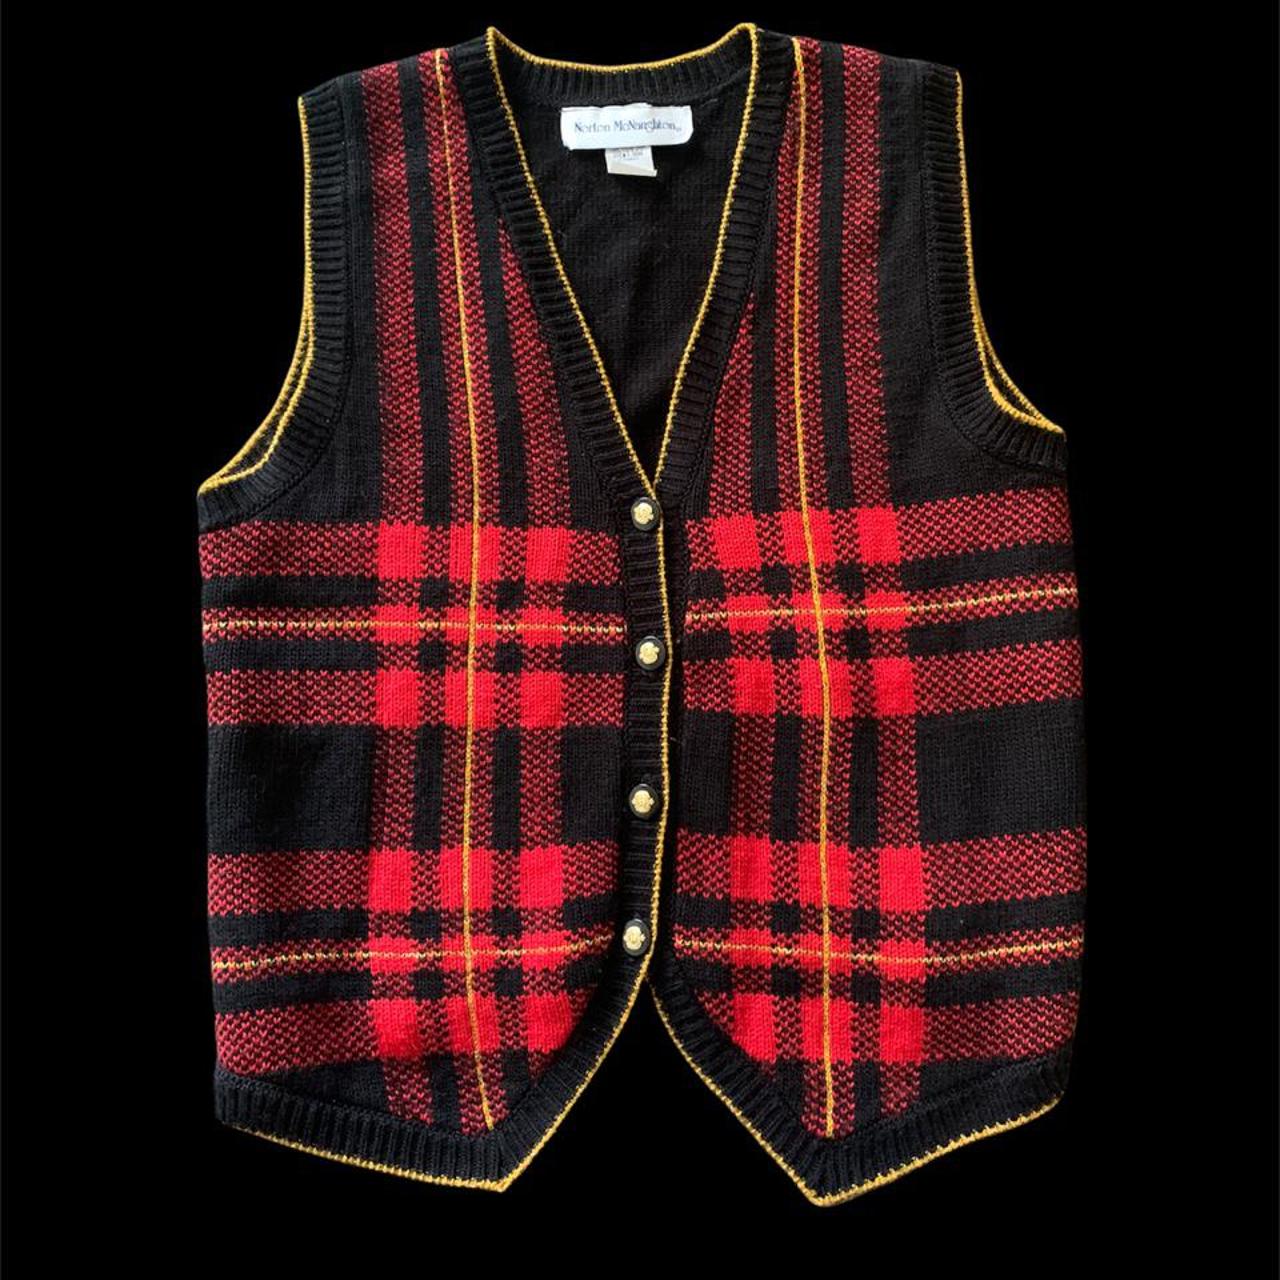 American Vintage Women's Red and Black Gilet